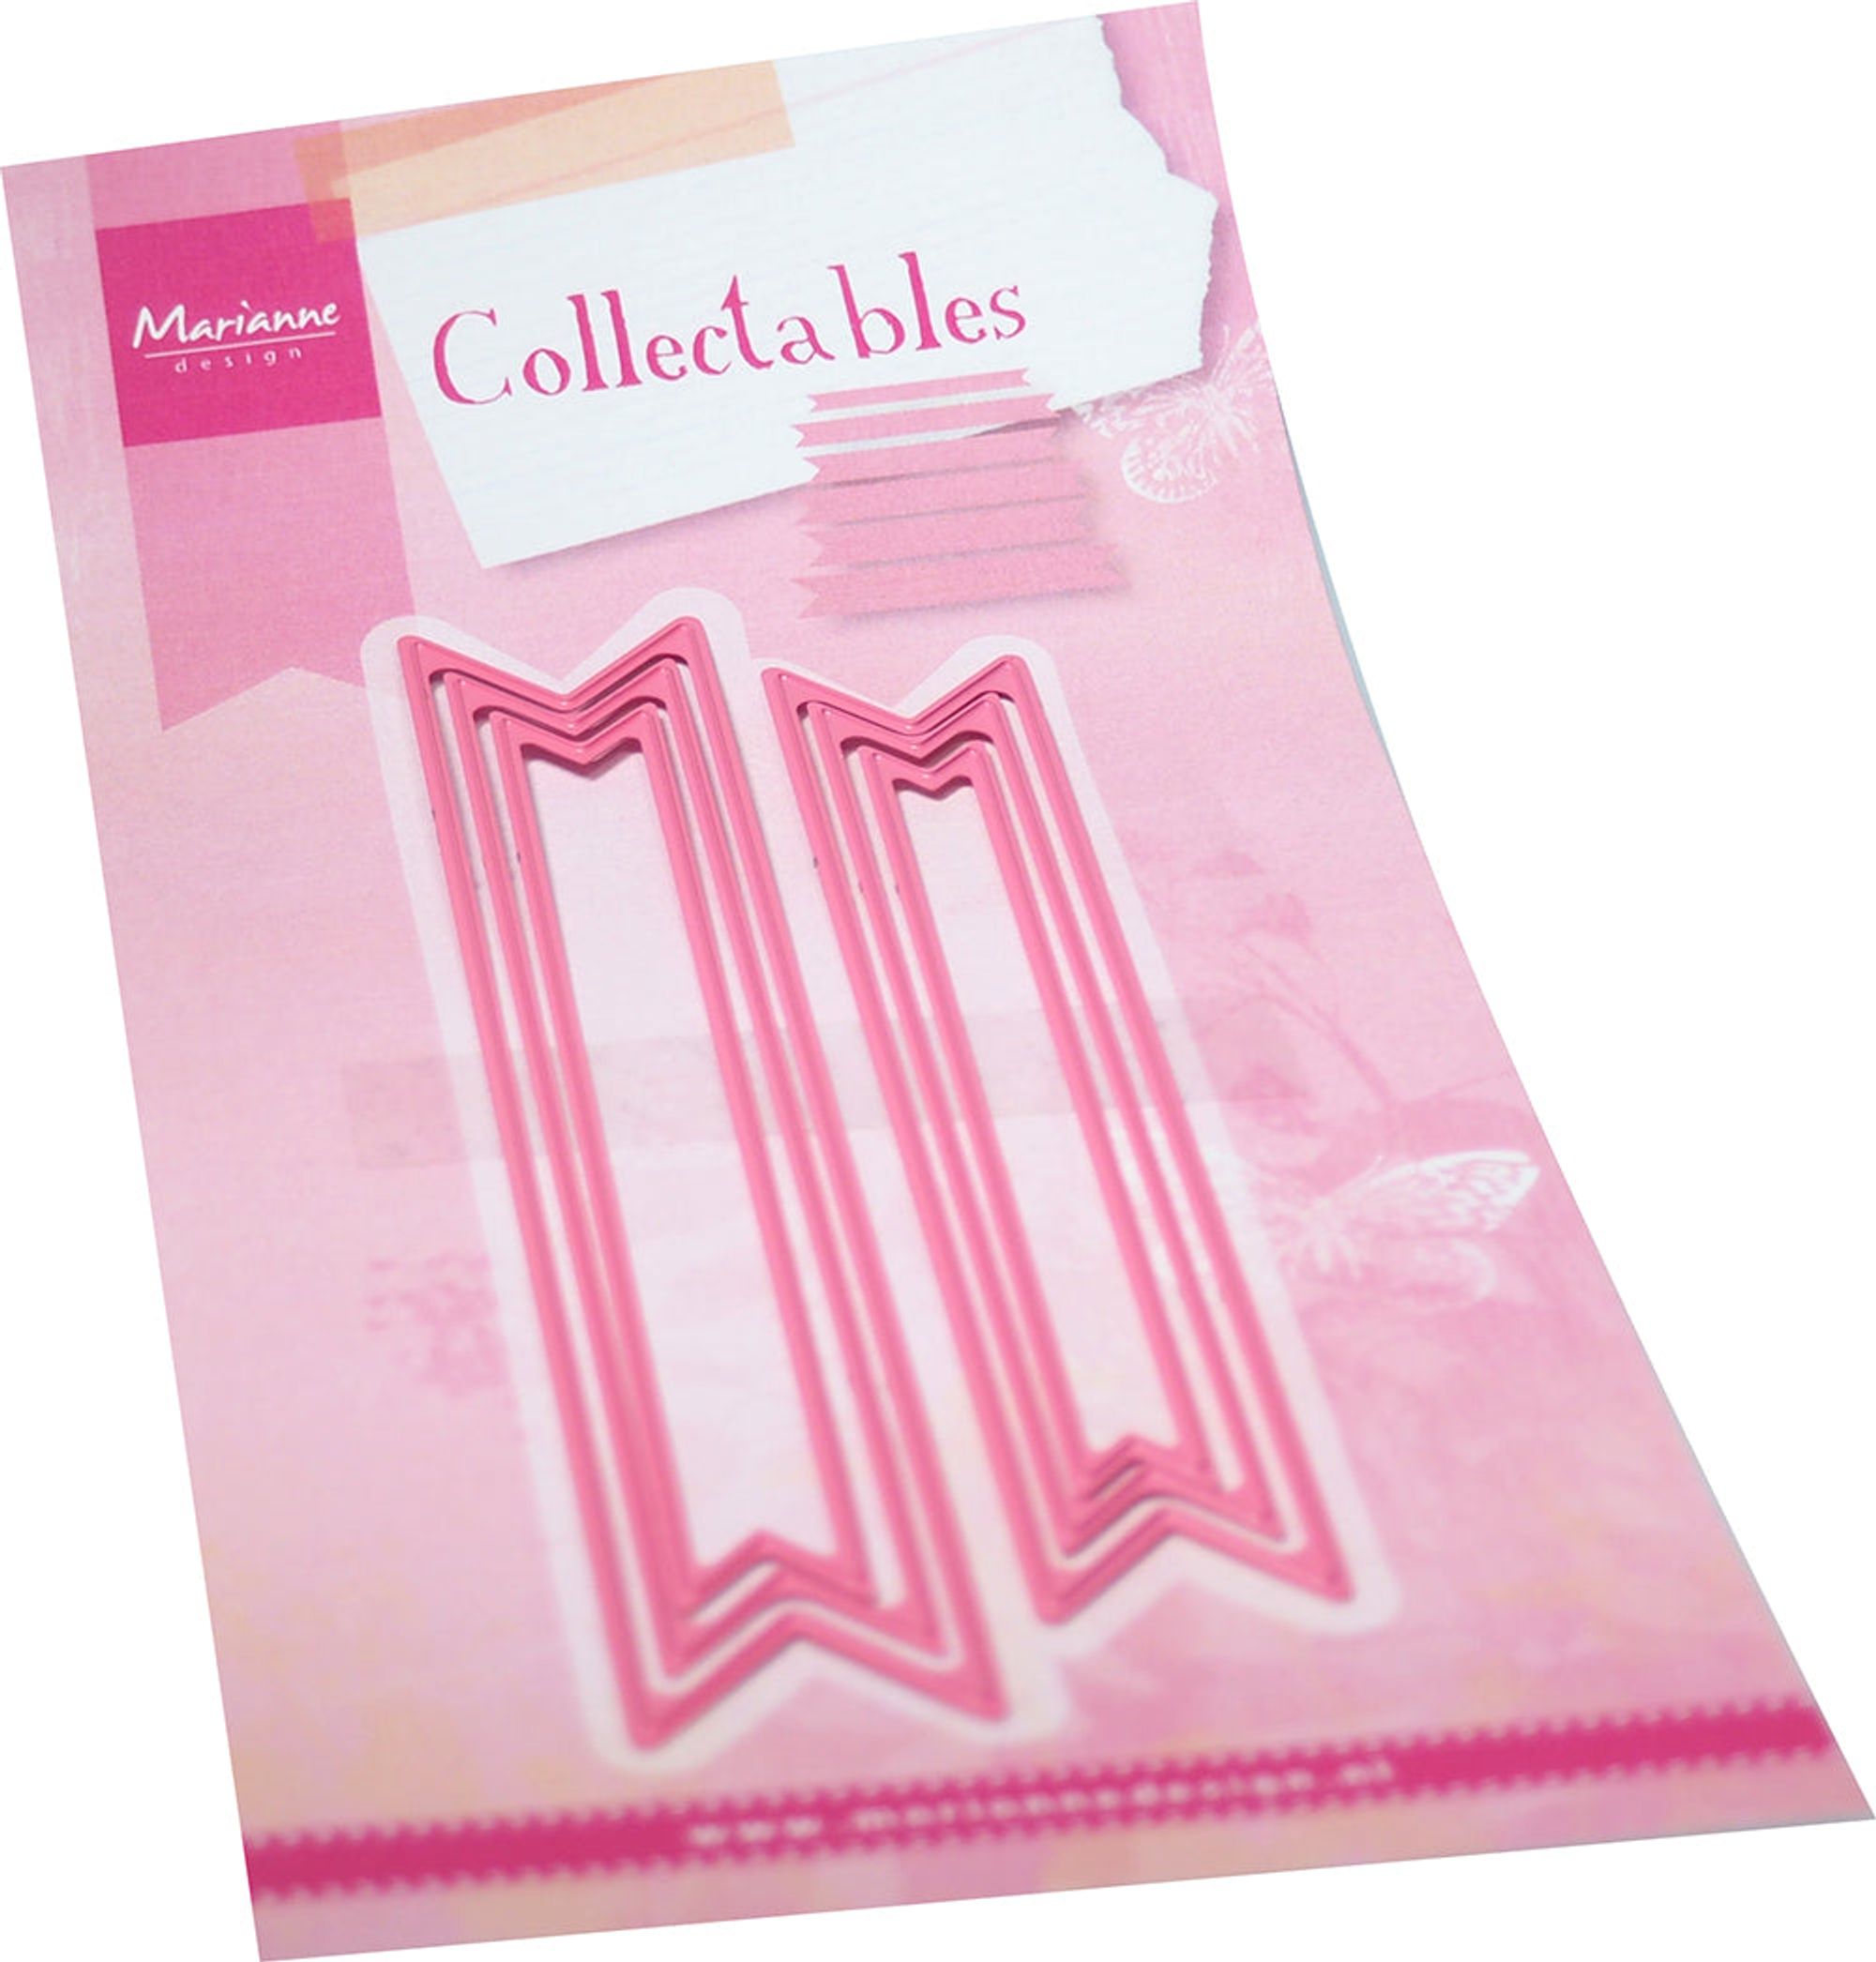 Marianne Design Collectables Die - Text Banners